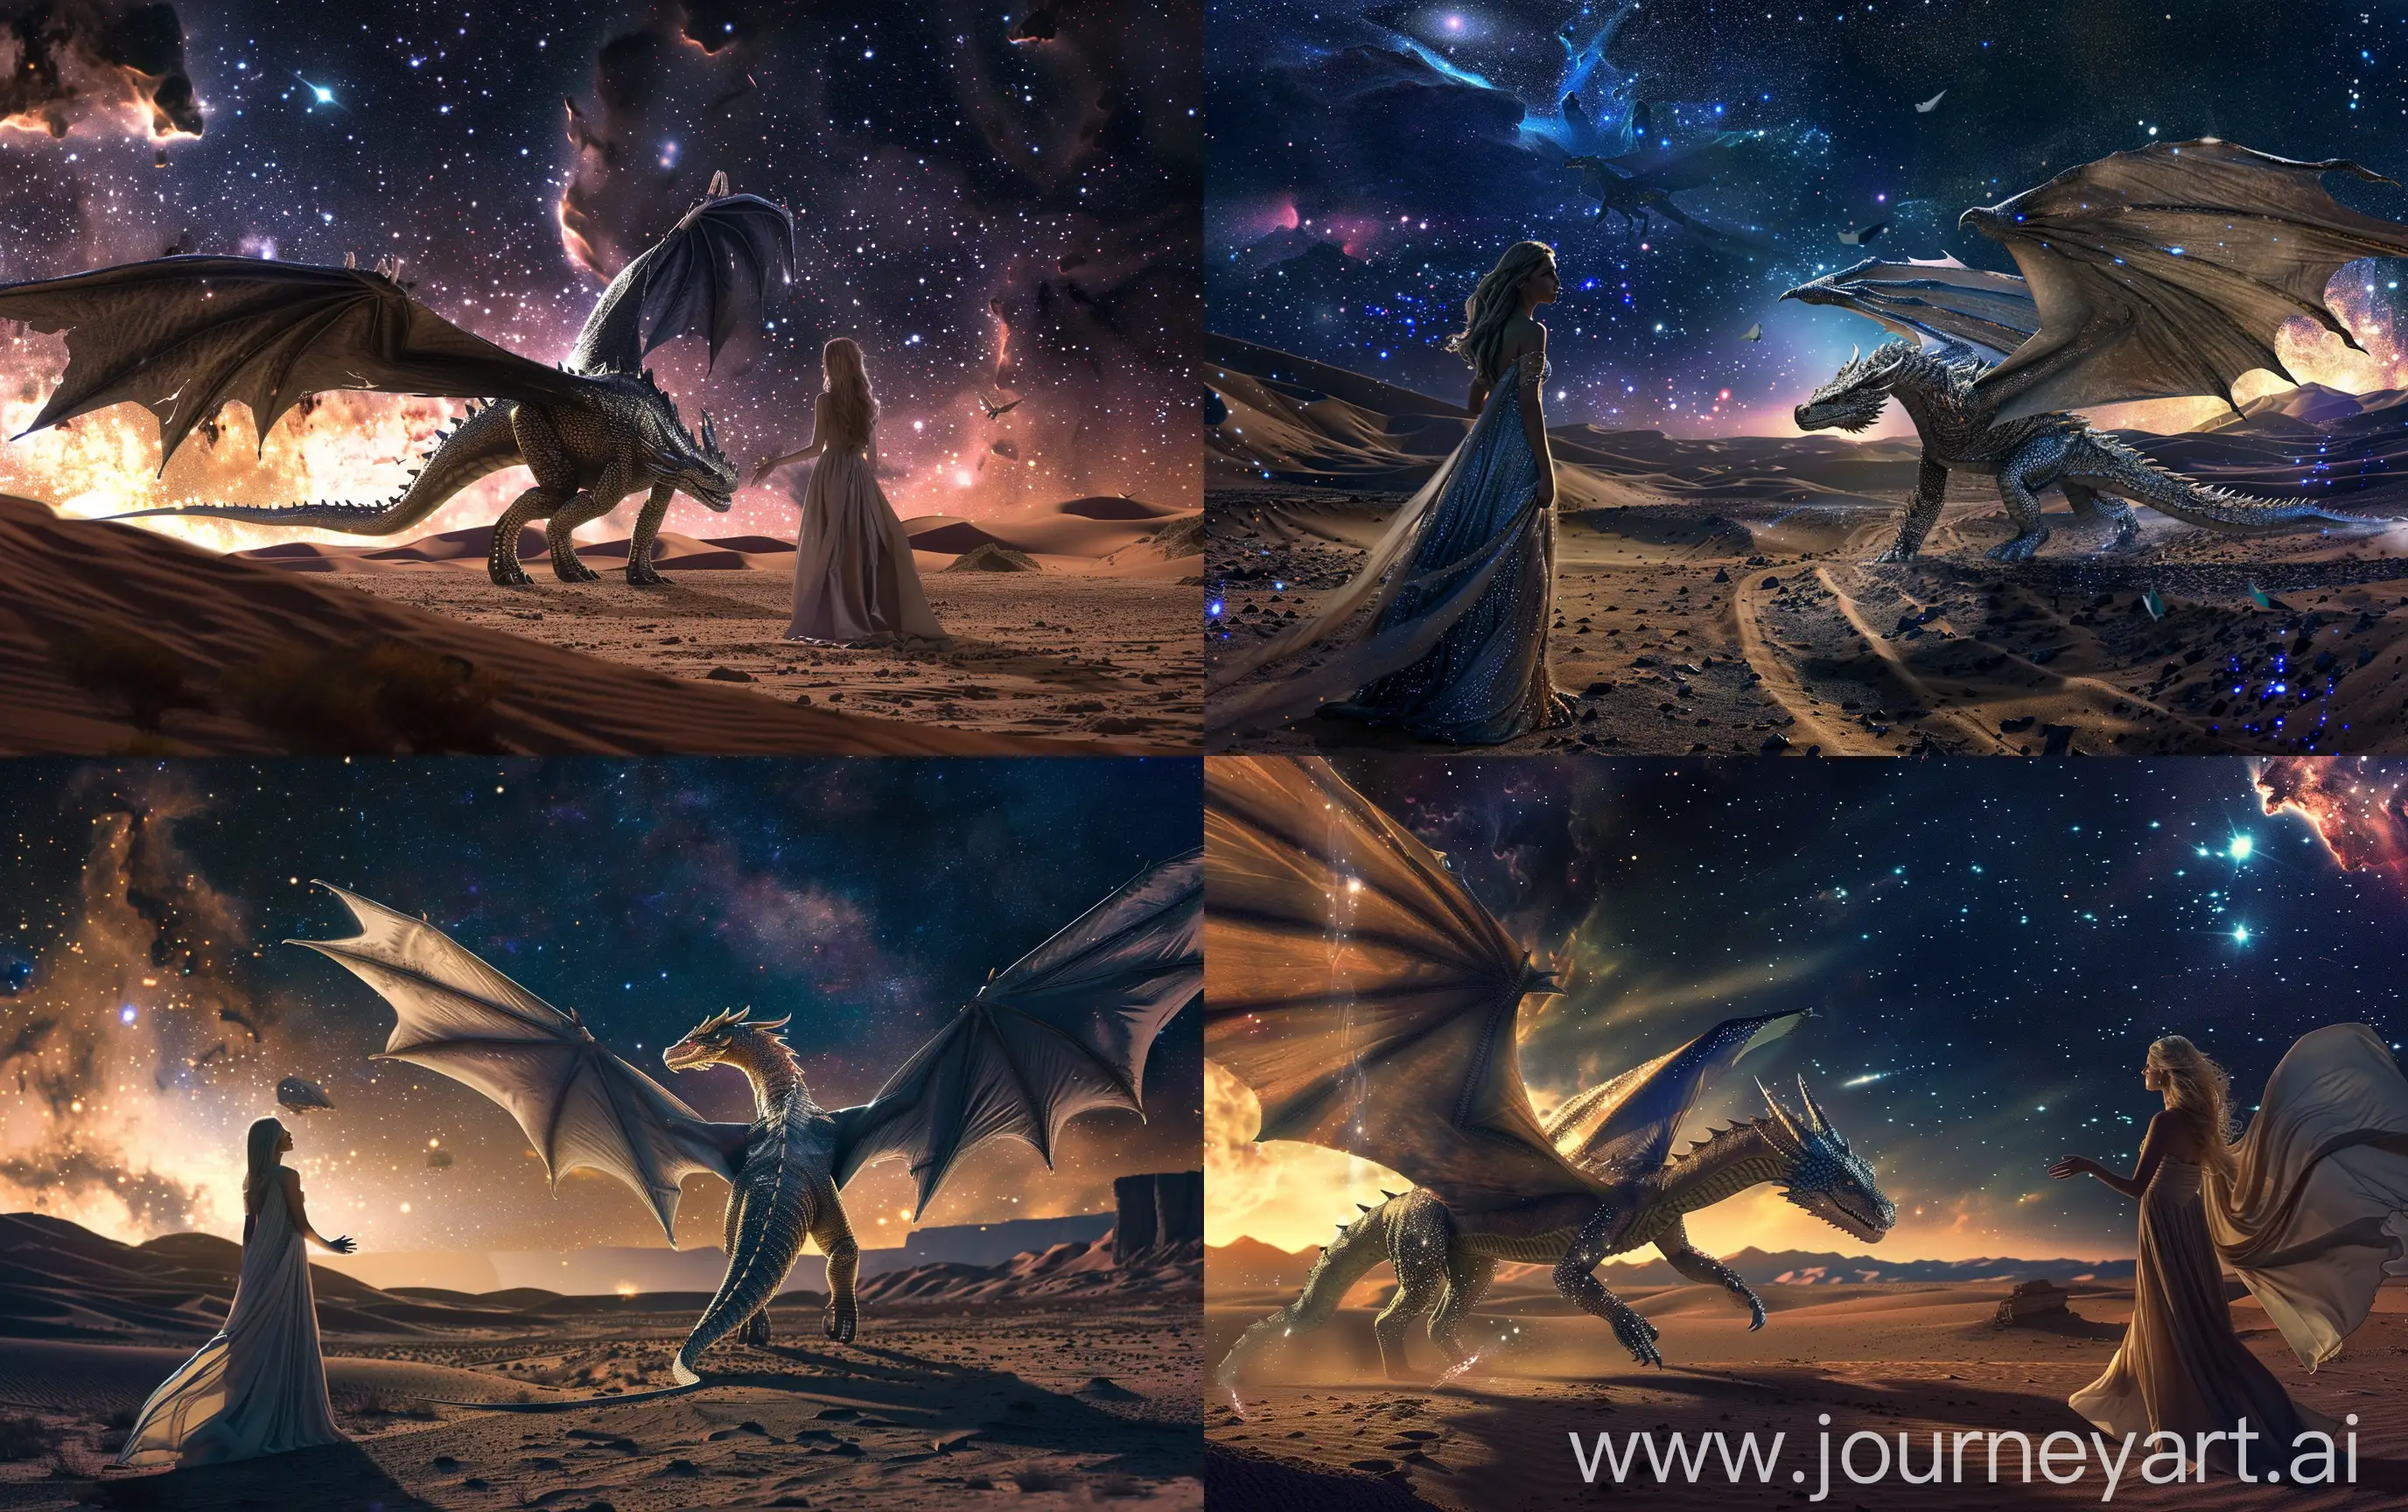 The big winged fairy tale shining dragon walks alone in desert at the distance, beautiful female in a long dress looks at the dragon with hand reached to the dragon, the night dark desert with small hills, in the sky is deep space with bright nebulas, realistic --ar 16:10